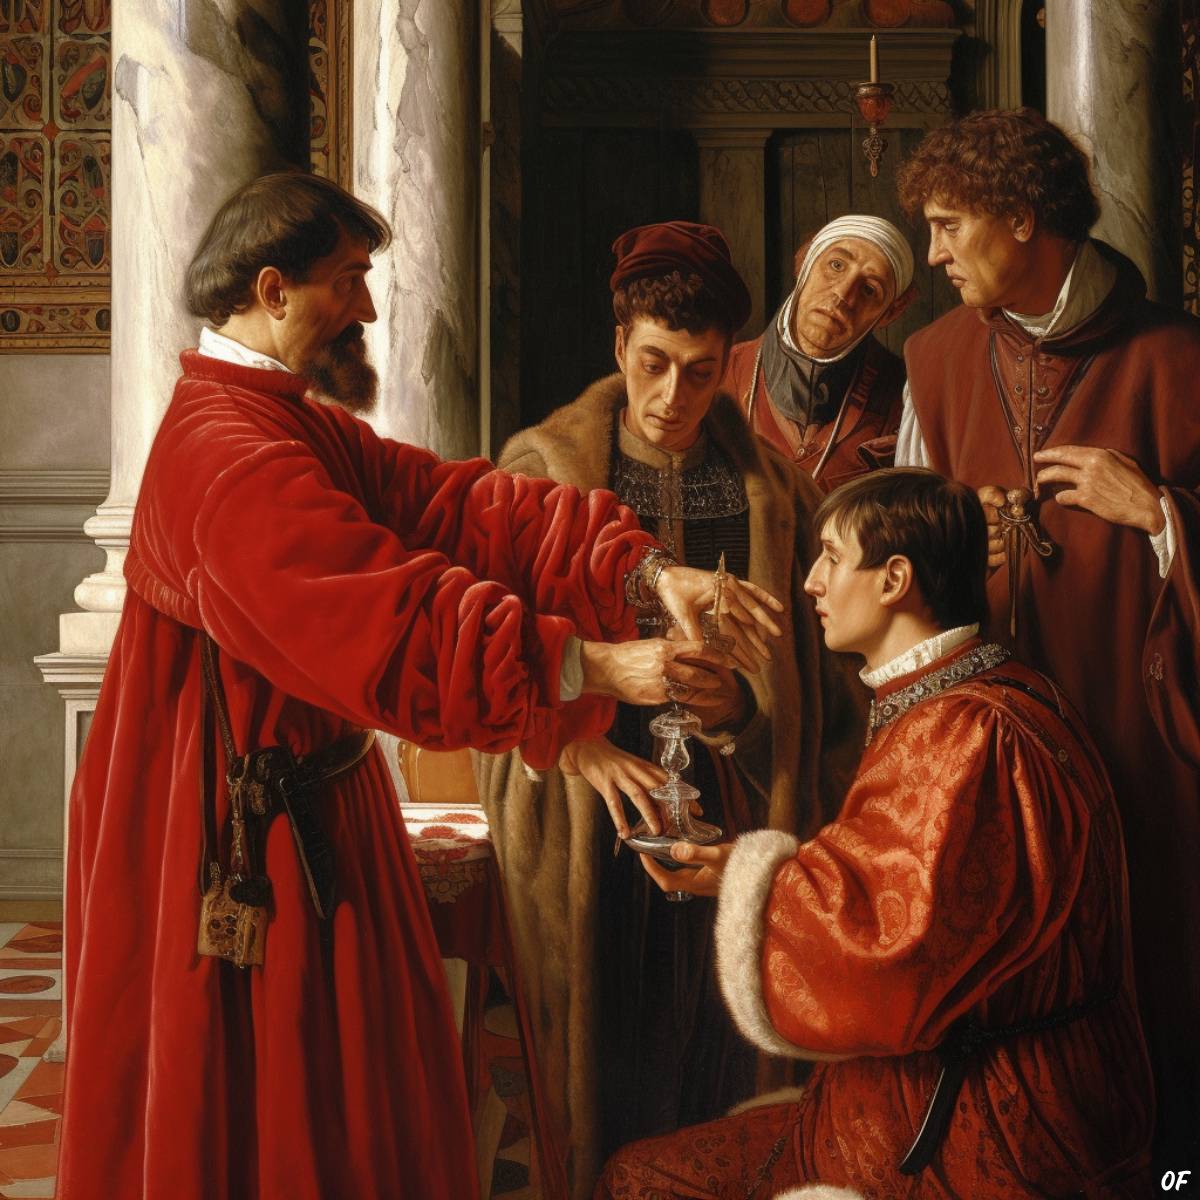 A painting depicting a group of men adorned in red robes, symbolizing Limpieza de Sangre and underlying racism.